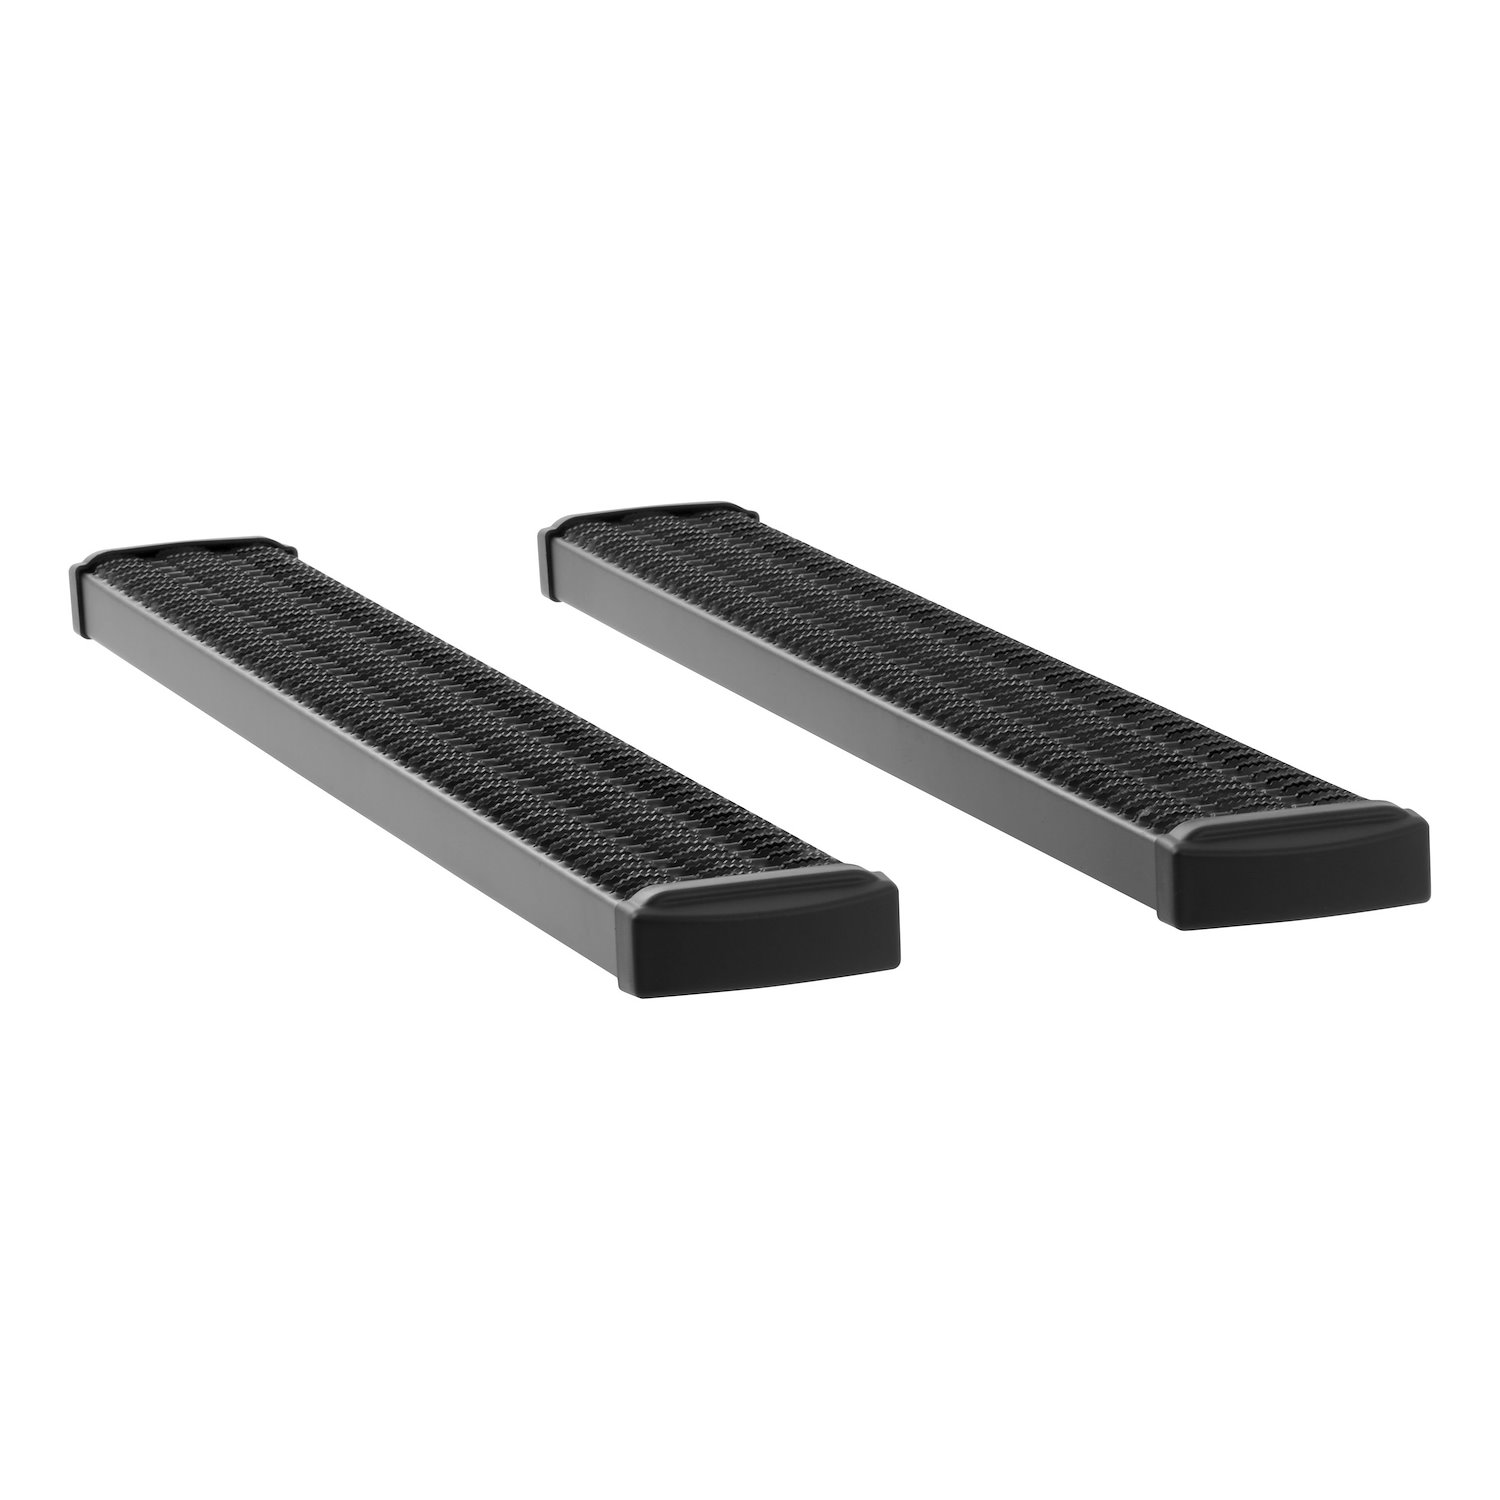 415060-400921 Grip Step 7 in. x 60 in. Black Aluminum Running Boards Fits Select Ford F-150